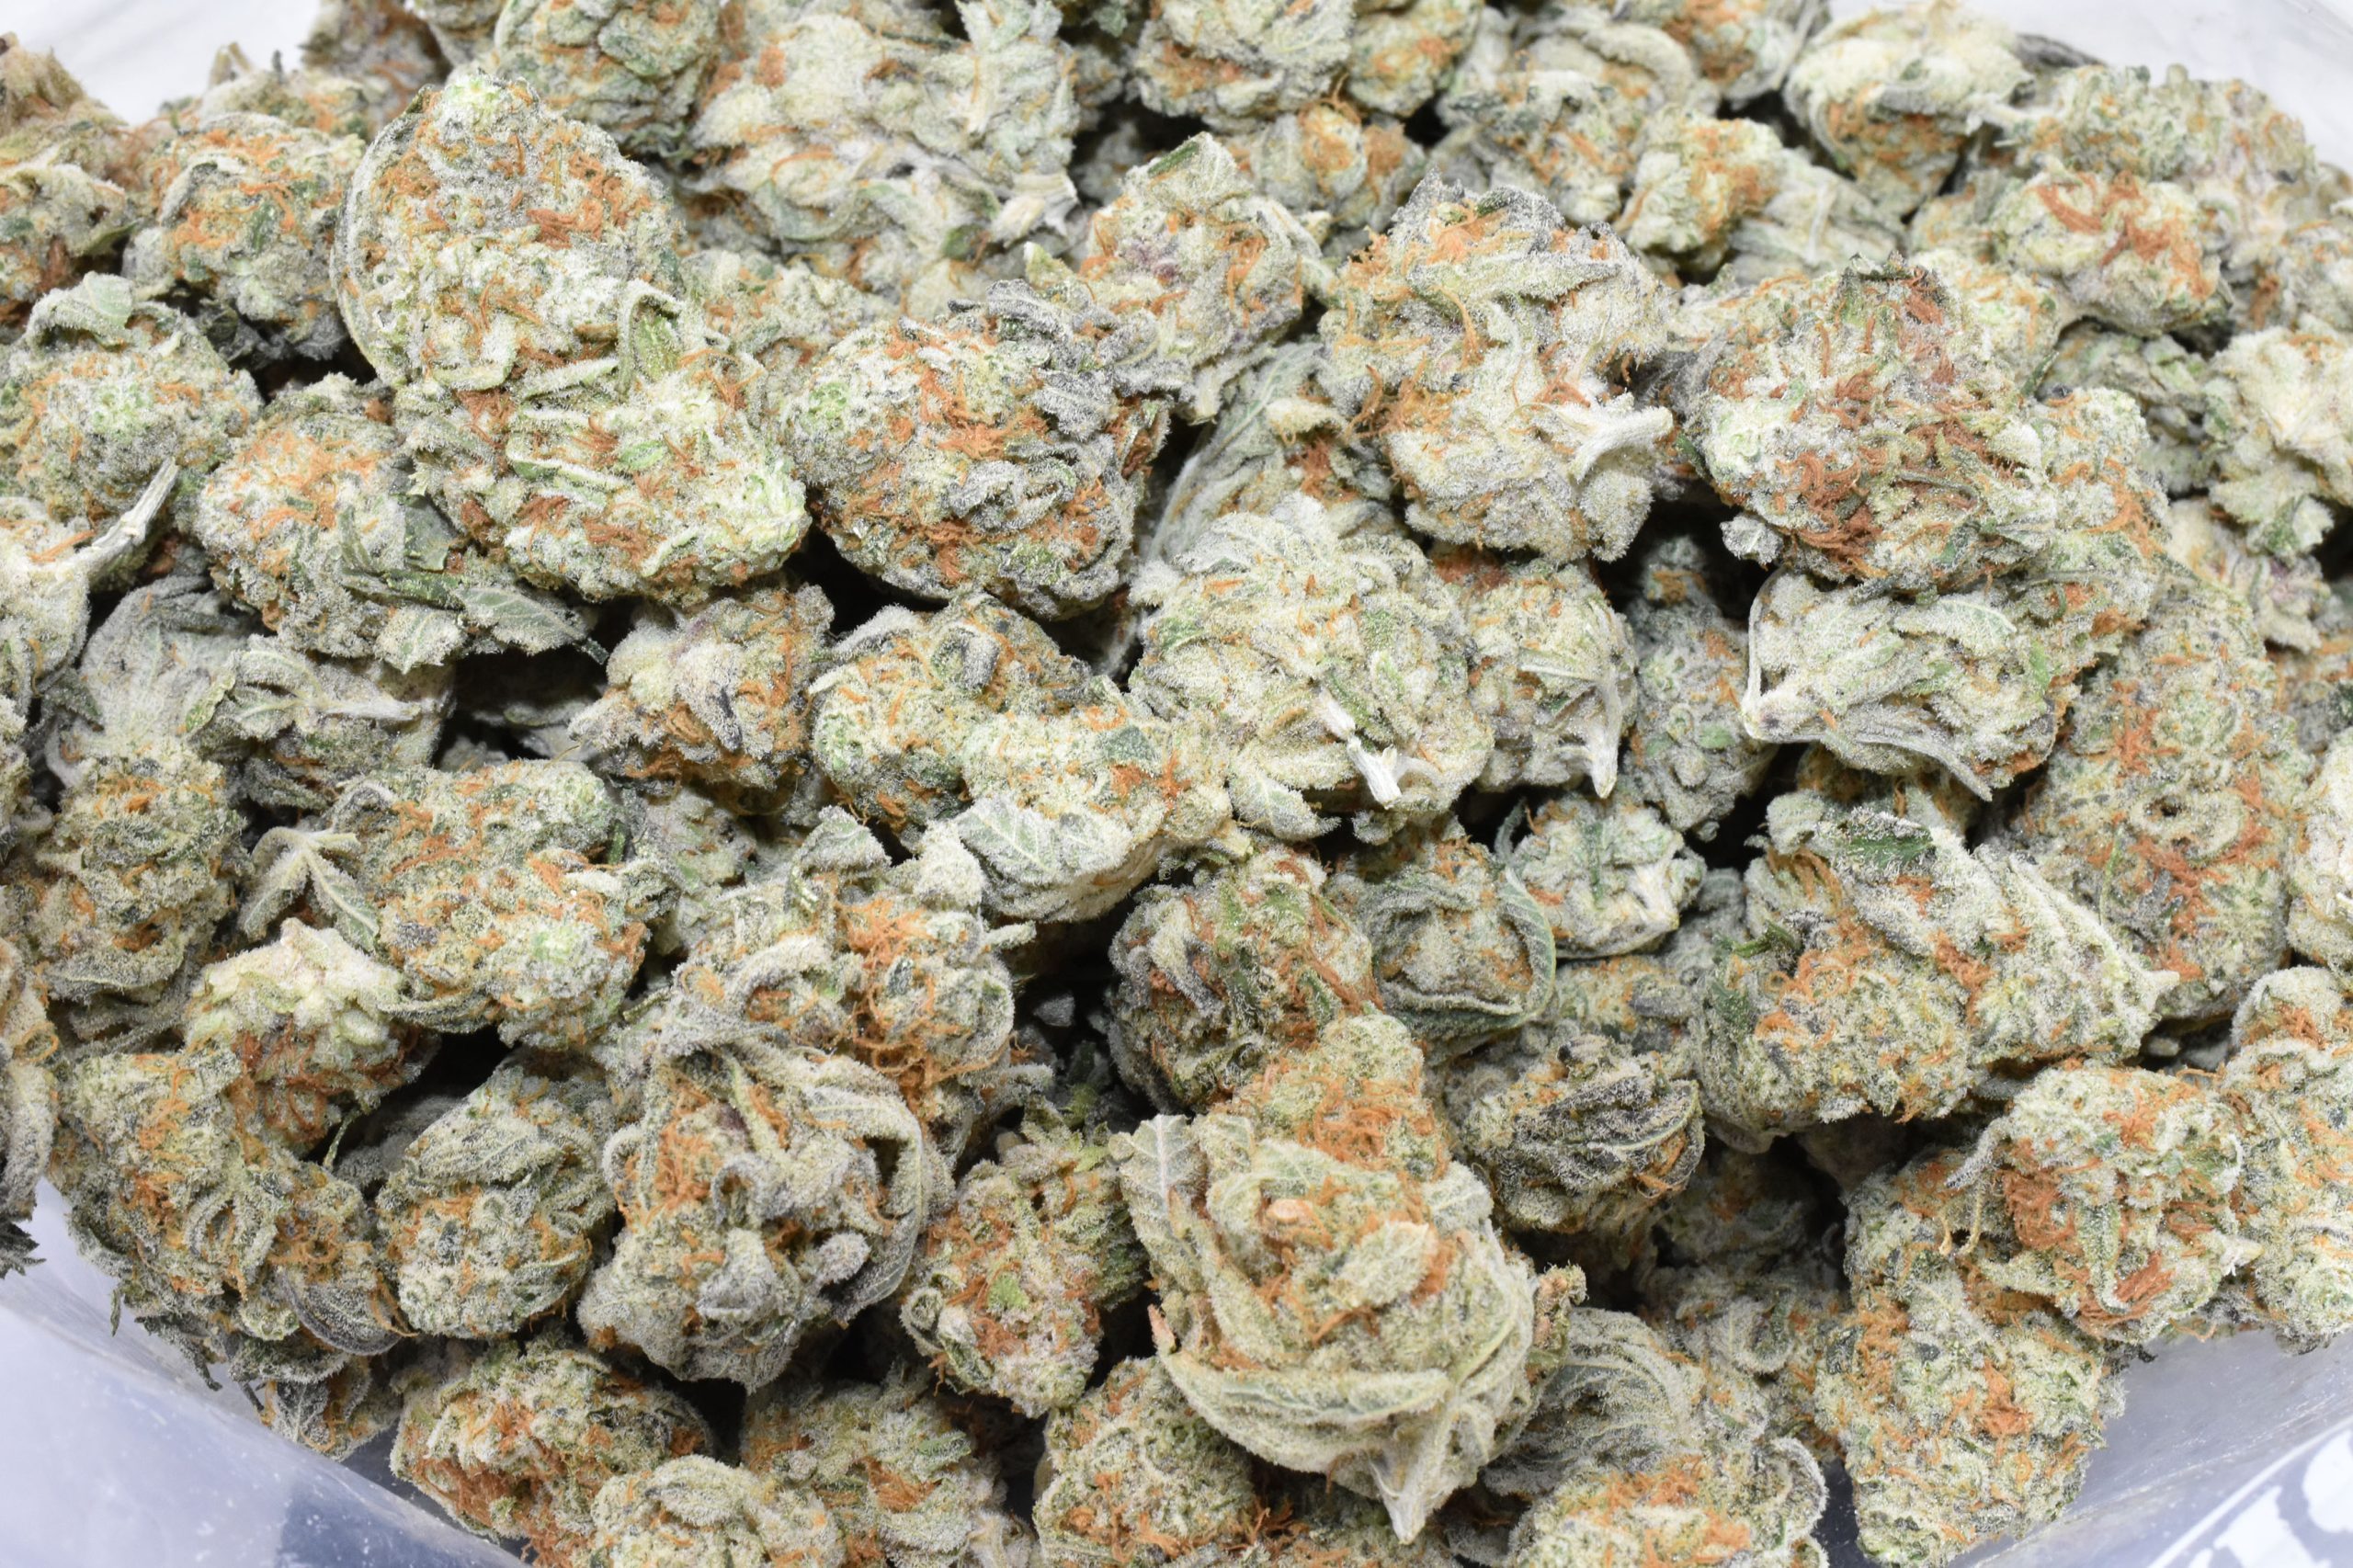 BUY-PLATINUM-OGKB-AT-CHRONICFARMS.CC-ONLINE-WEED-DISPENSARY-IN-CANADA